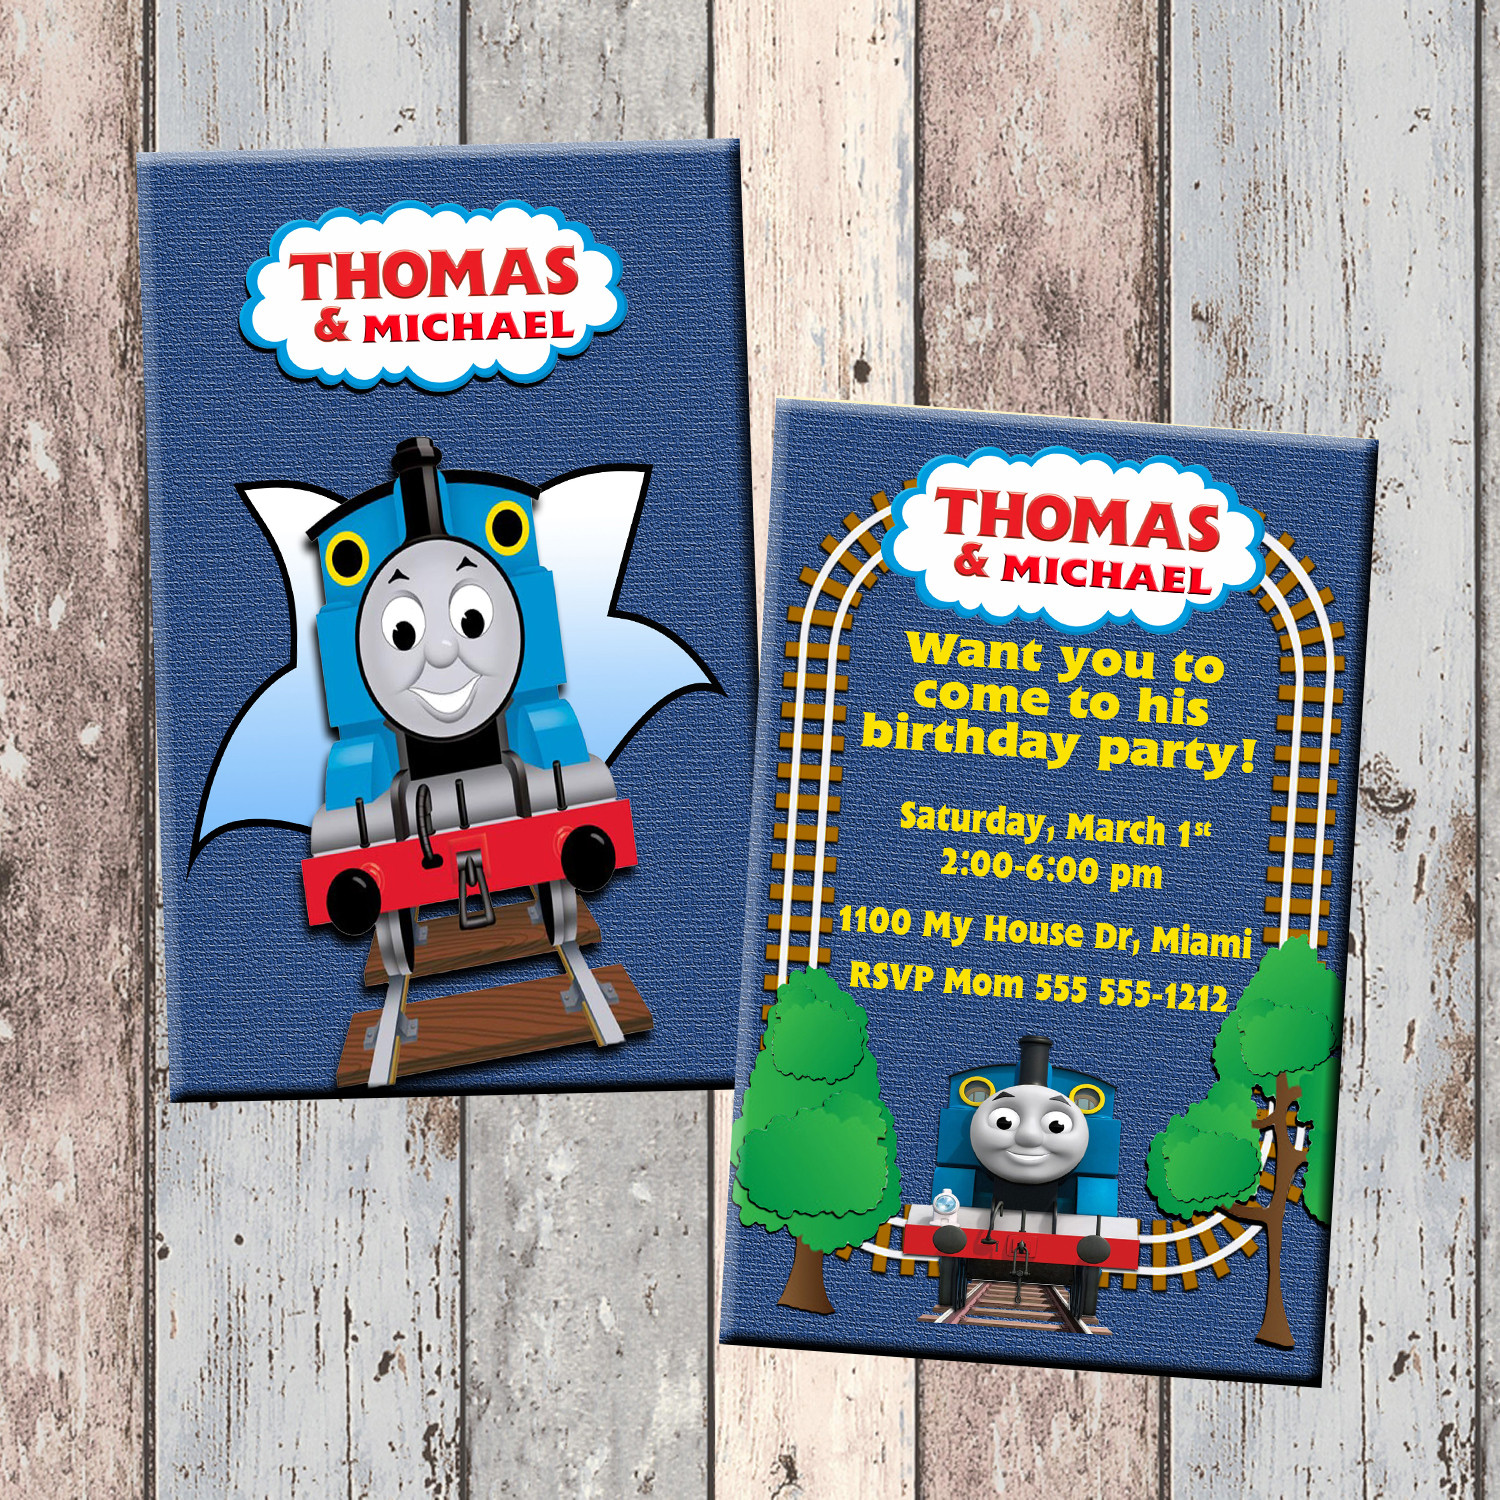 Personalized Thomas The Train Birthday Invitations
 Thomas the Train Personalized Birthday Invitation 2 Sided